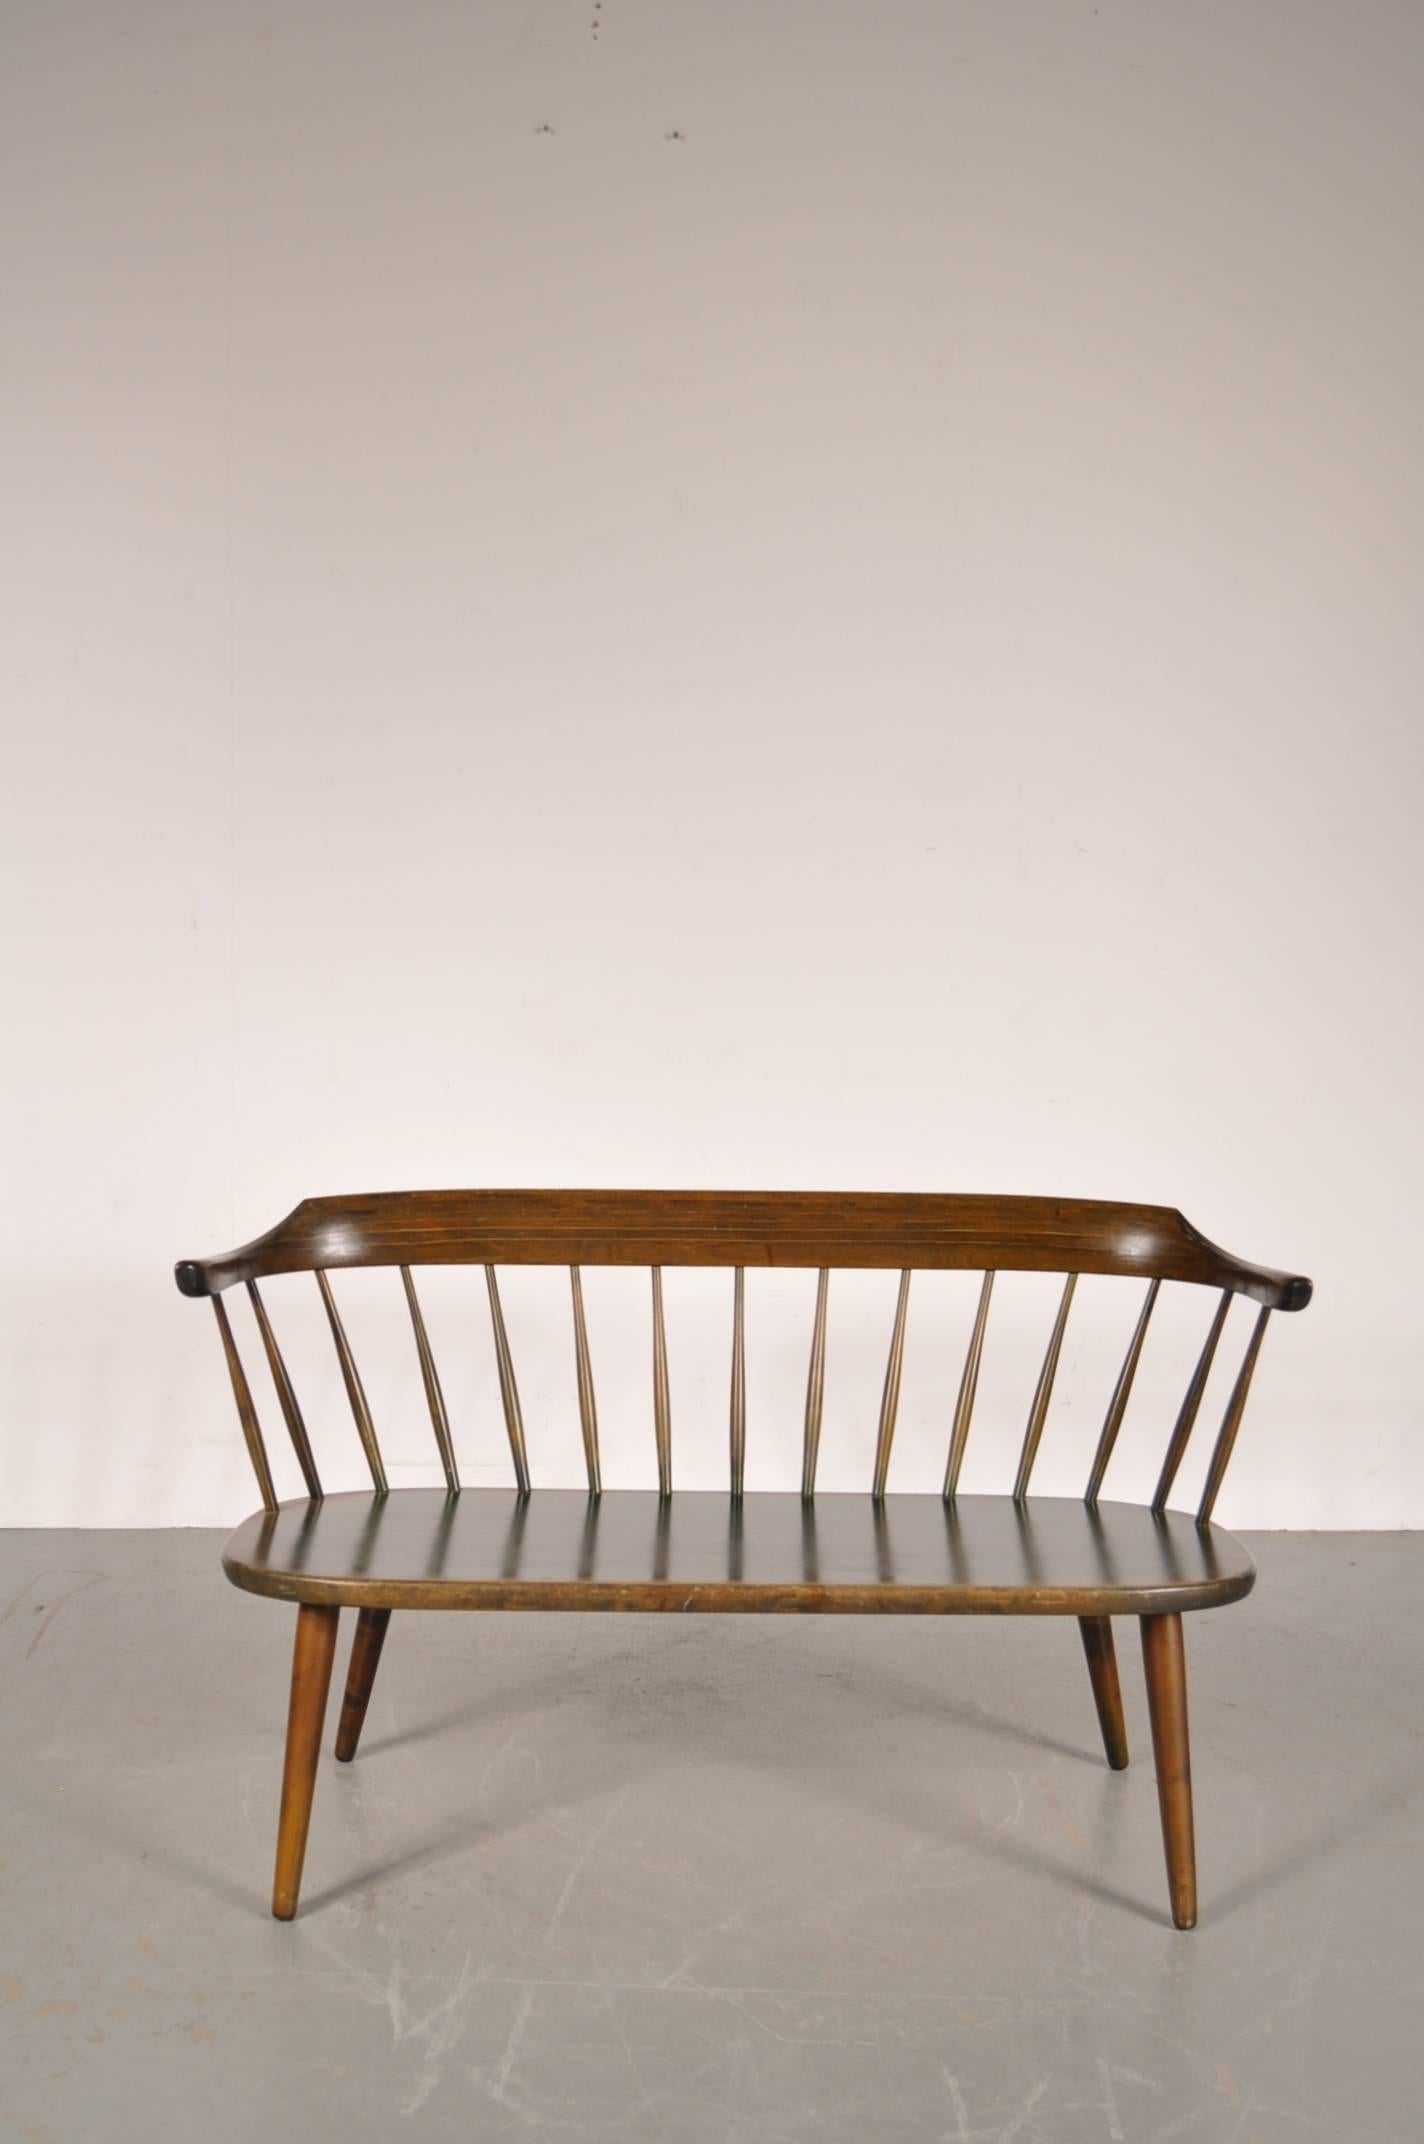 Beautiful rare bench designed by Yngve Ekstrom, manufactured by Småland in Sweden around 1950.

This unique piece is completely made of beautiful green stained birch wood. It comes with a comfortable wool cushion that gives it a nice finishing